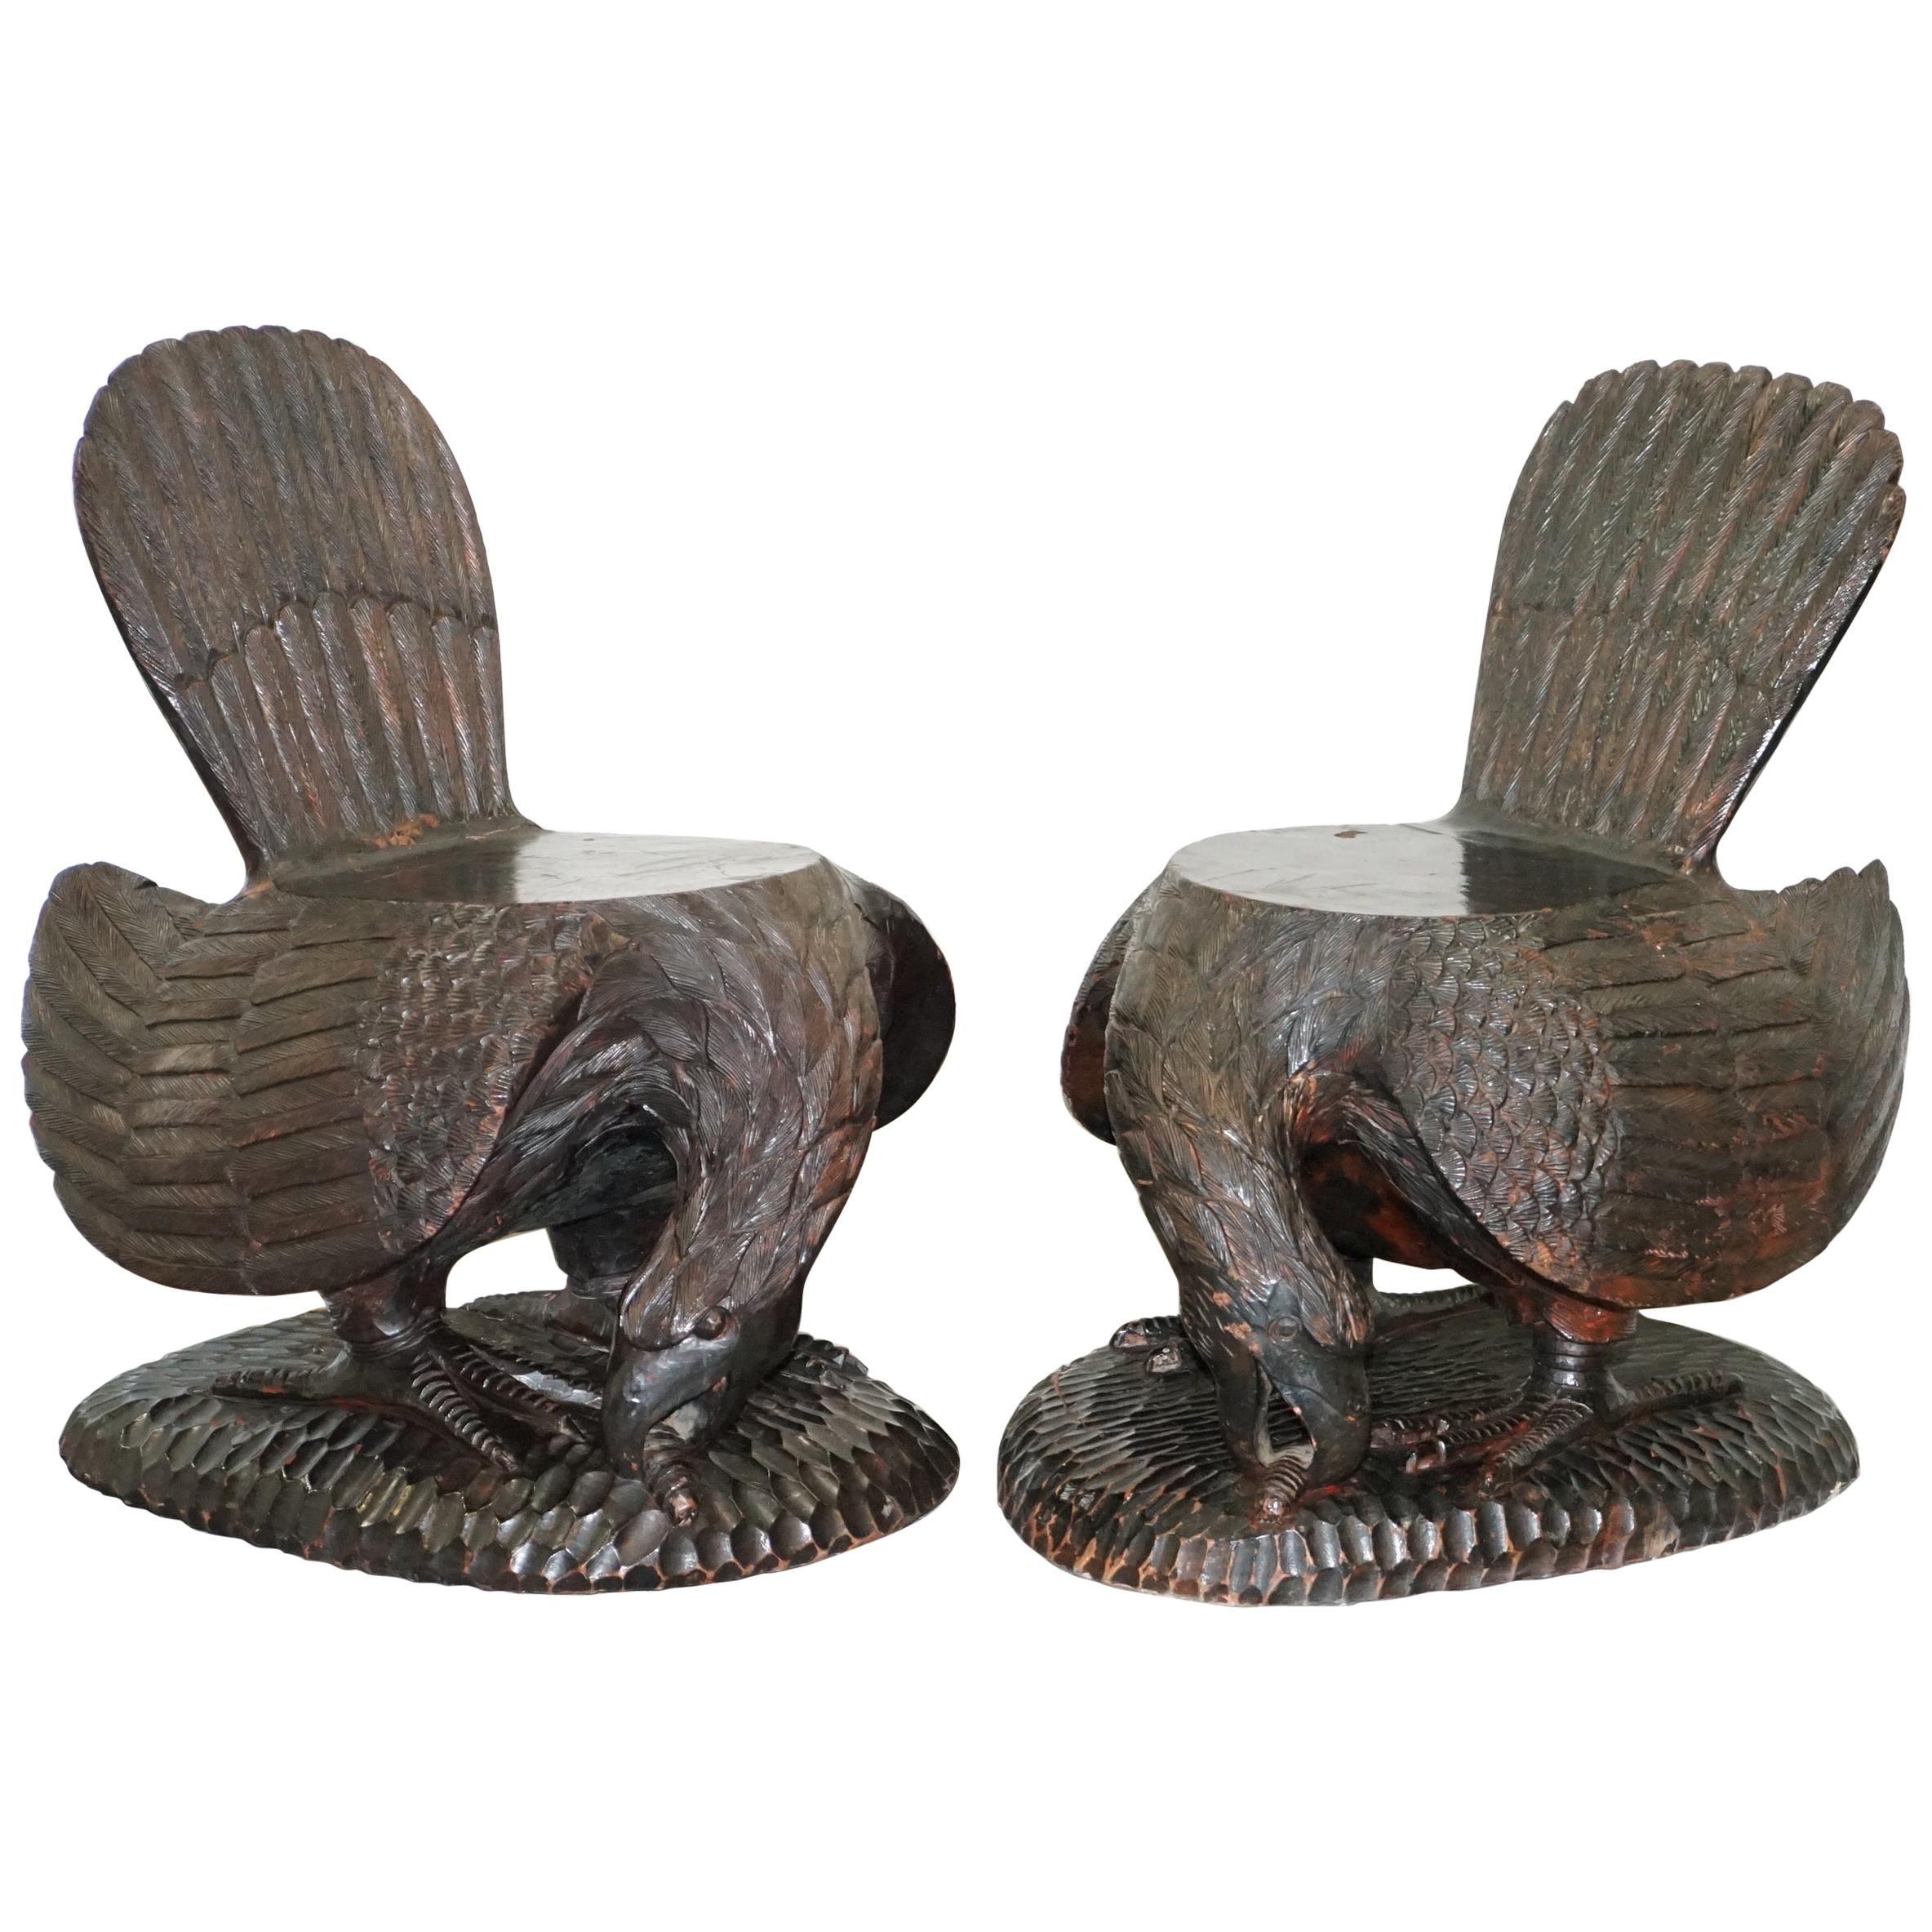 Pair of Ornate Hand Carved Solid Wood circa 1900 American Eagle Armchairs For Sale